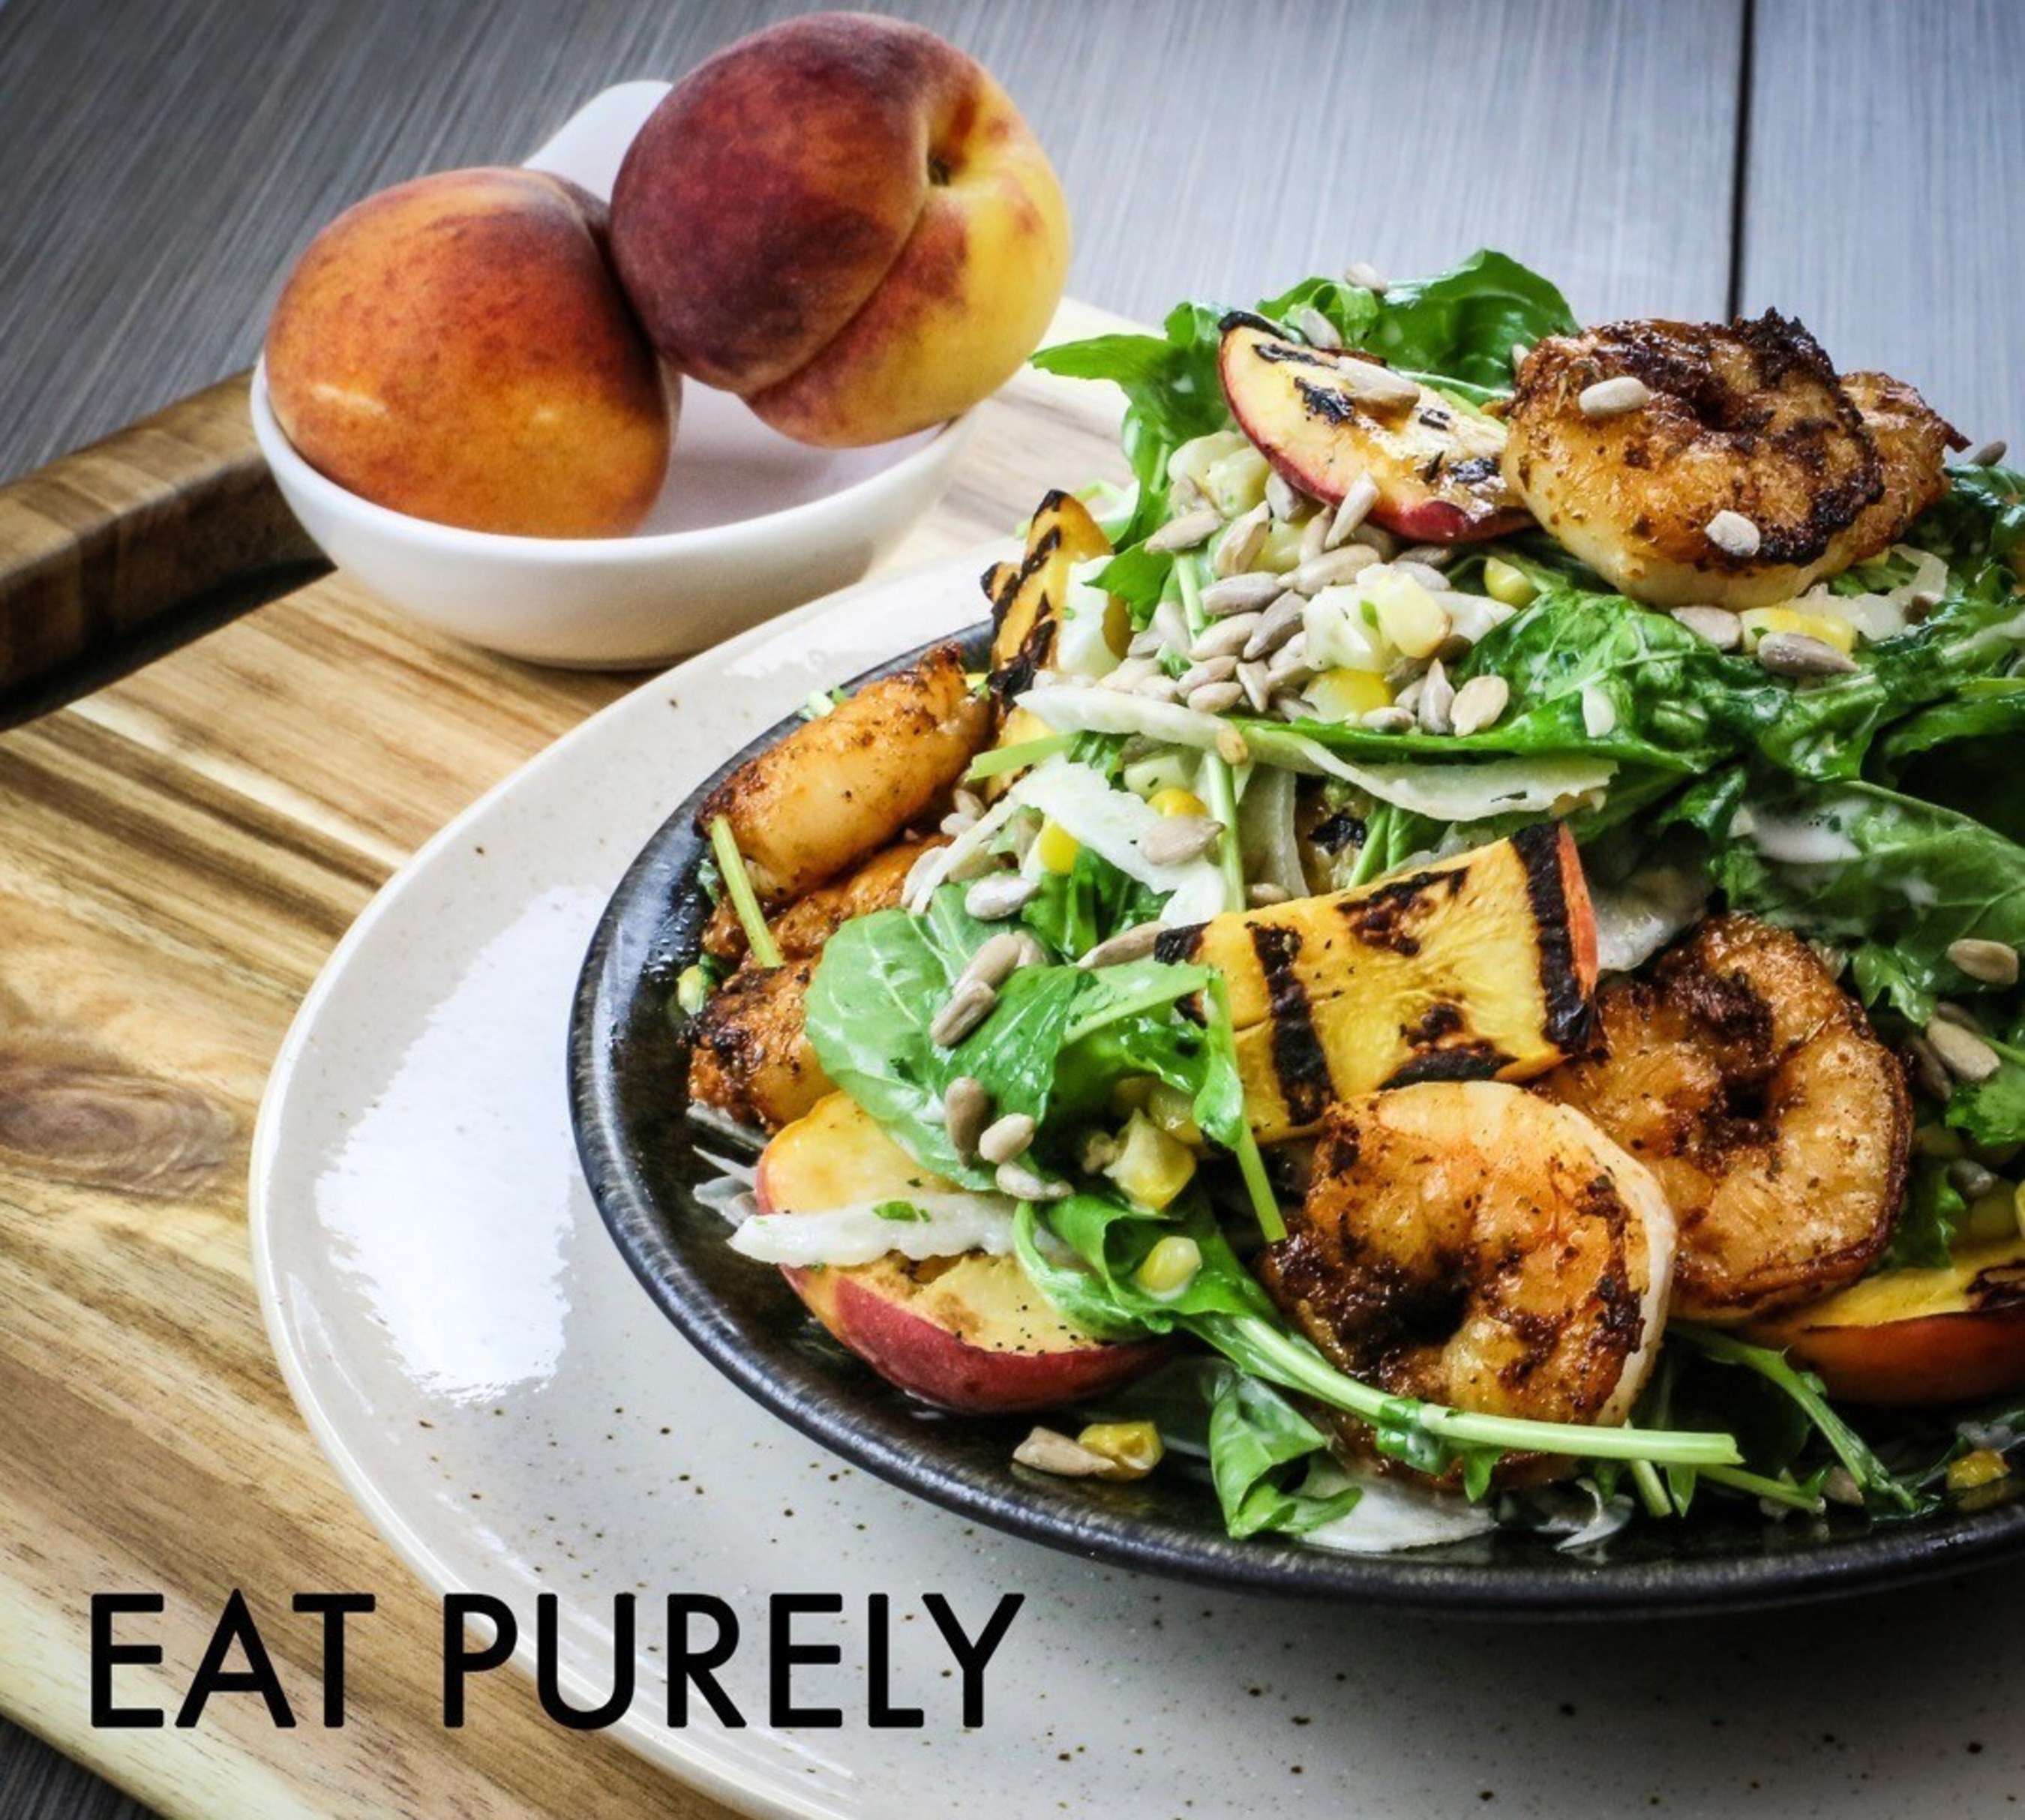 Blackened Shrimp and Grilled Peach Salad from Eat Purely